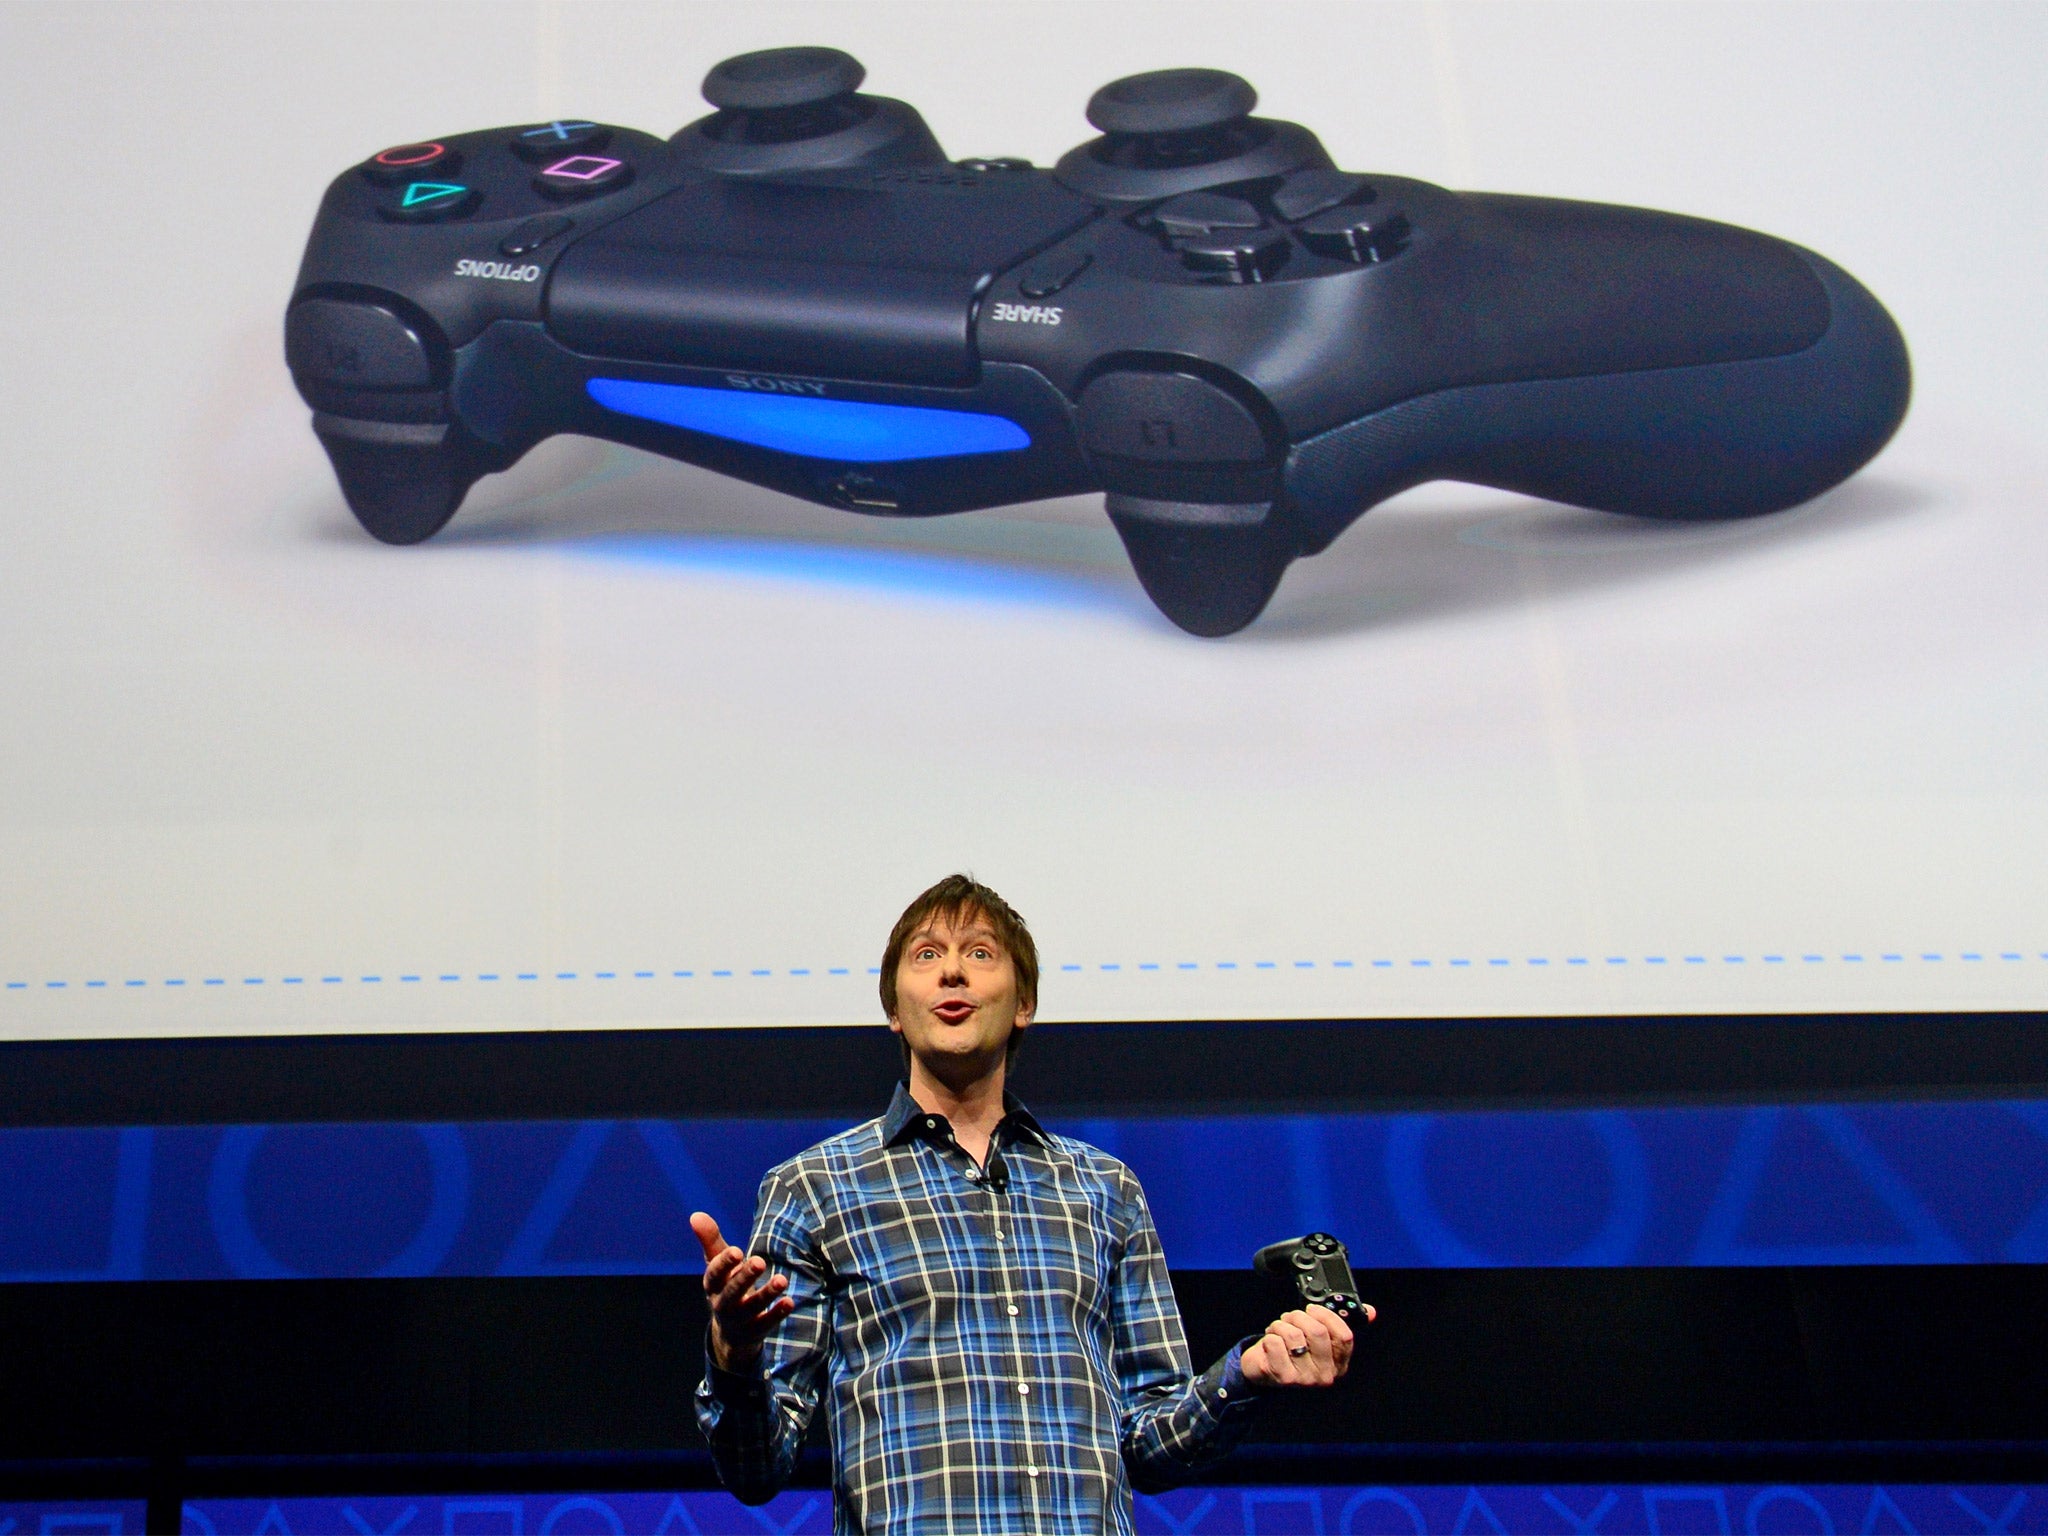 Video game designer Mark Cerny talks about the new controler Bioshock 4 as Sony introduces the PlayStation 4